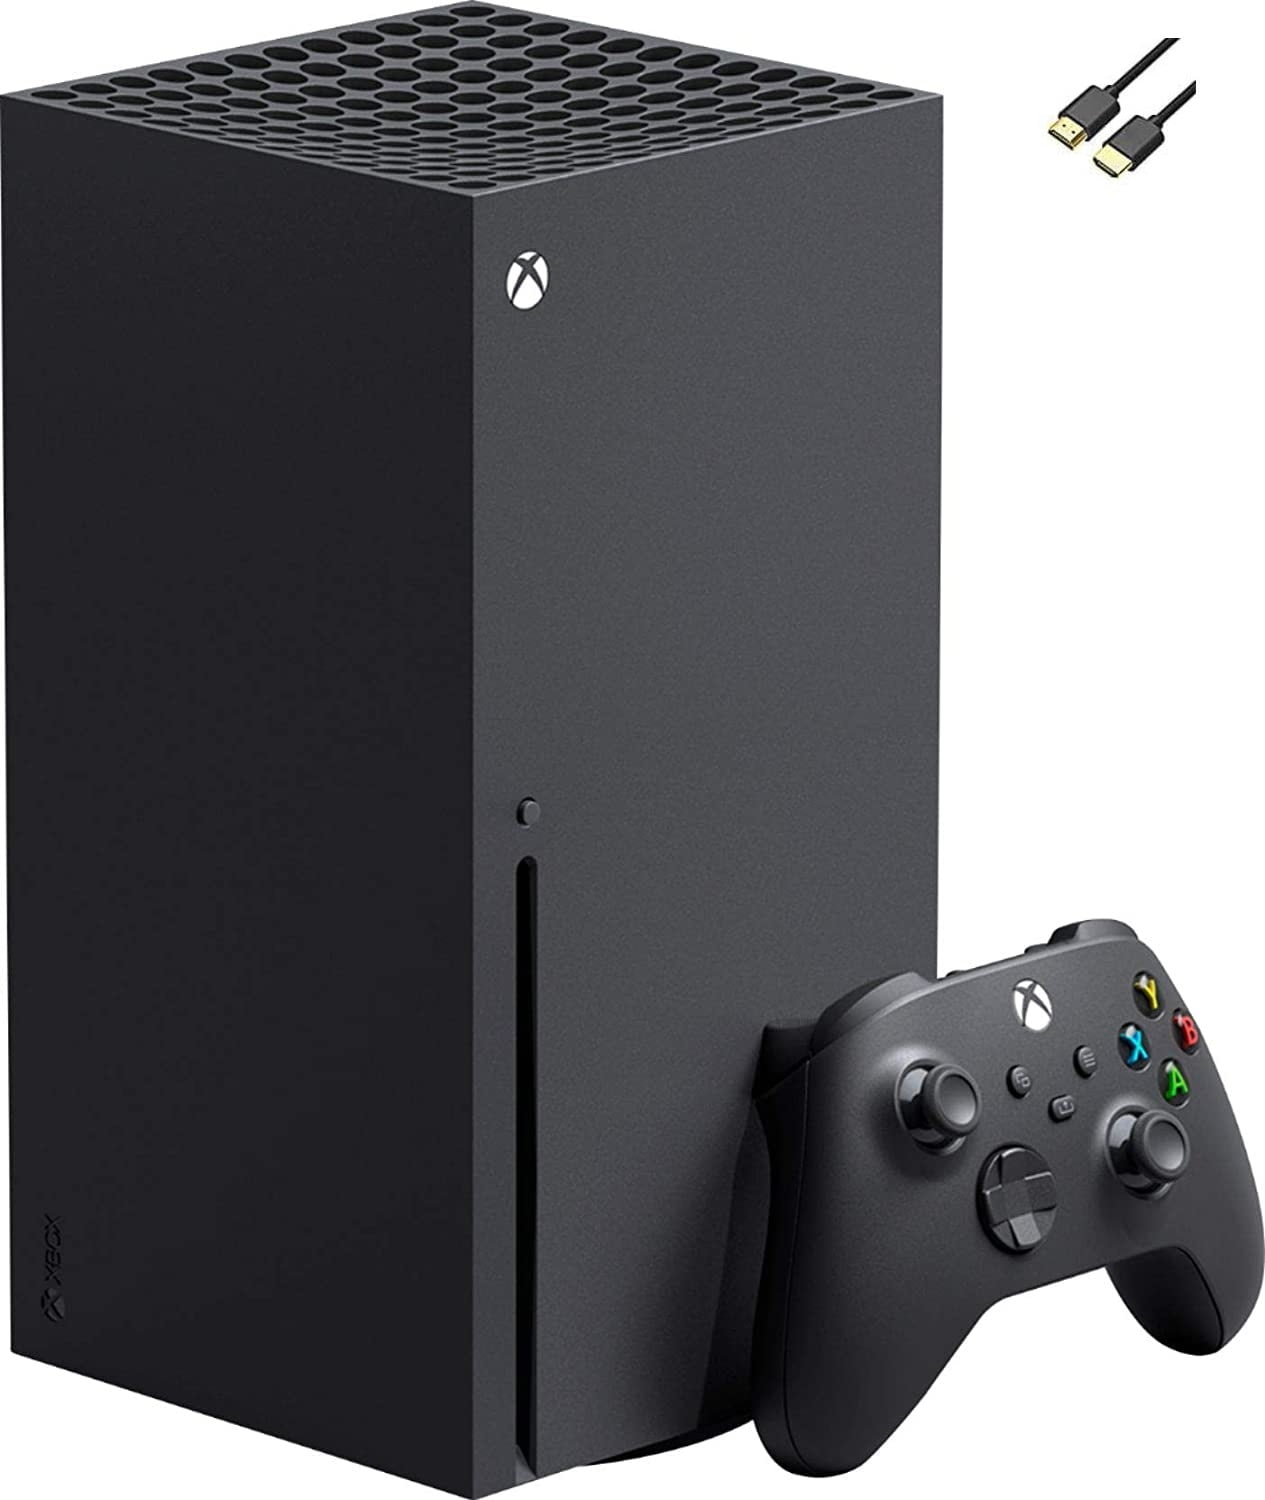 2023 Newest Xbox Series X 1TB SSD Video Gaming Console With One Wireless Controller 16GB GDDR6 RAM 8X Cores Zen 2 CPU RDNA 2 GPU 27239332 105a 4349 Aedc D84995c66f09.be68c08fe4338862ee352f4d51995569 